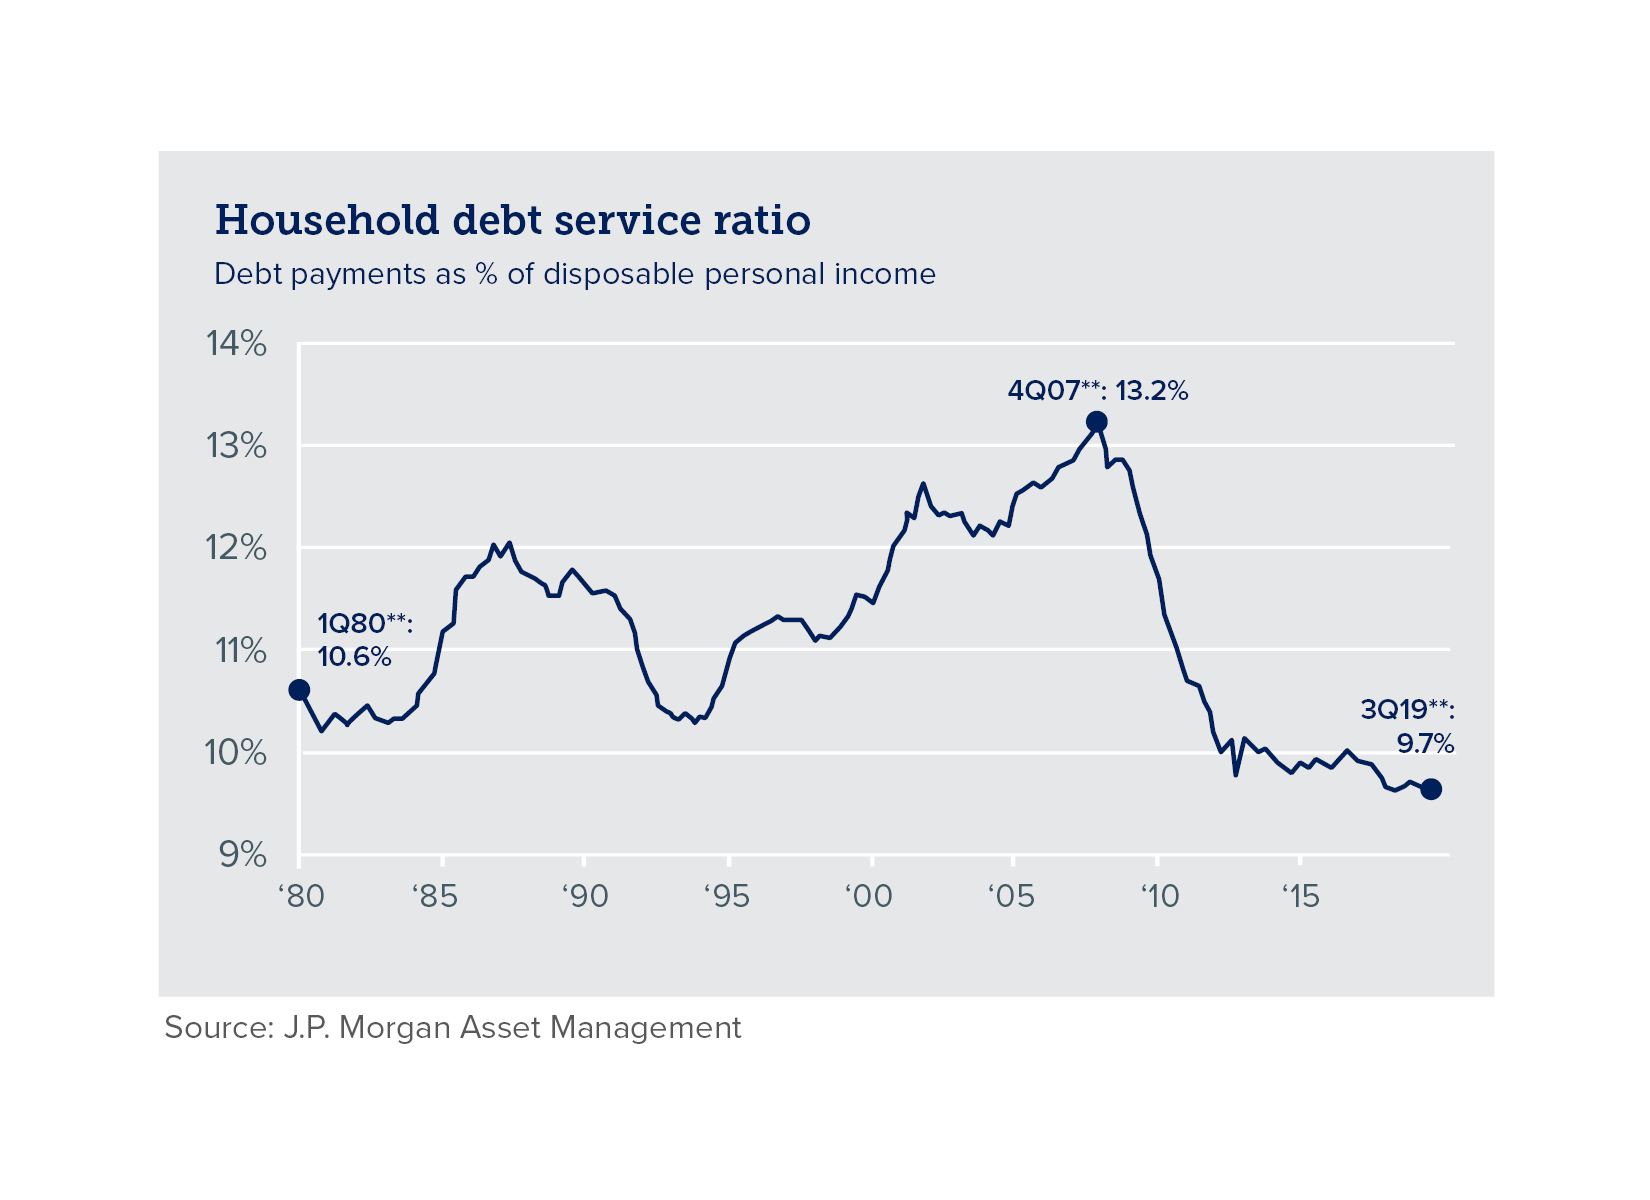 Chart of household debt service ratio over time